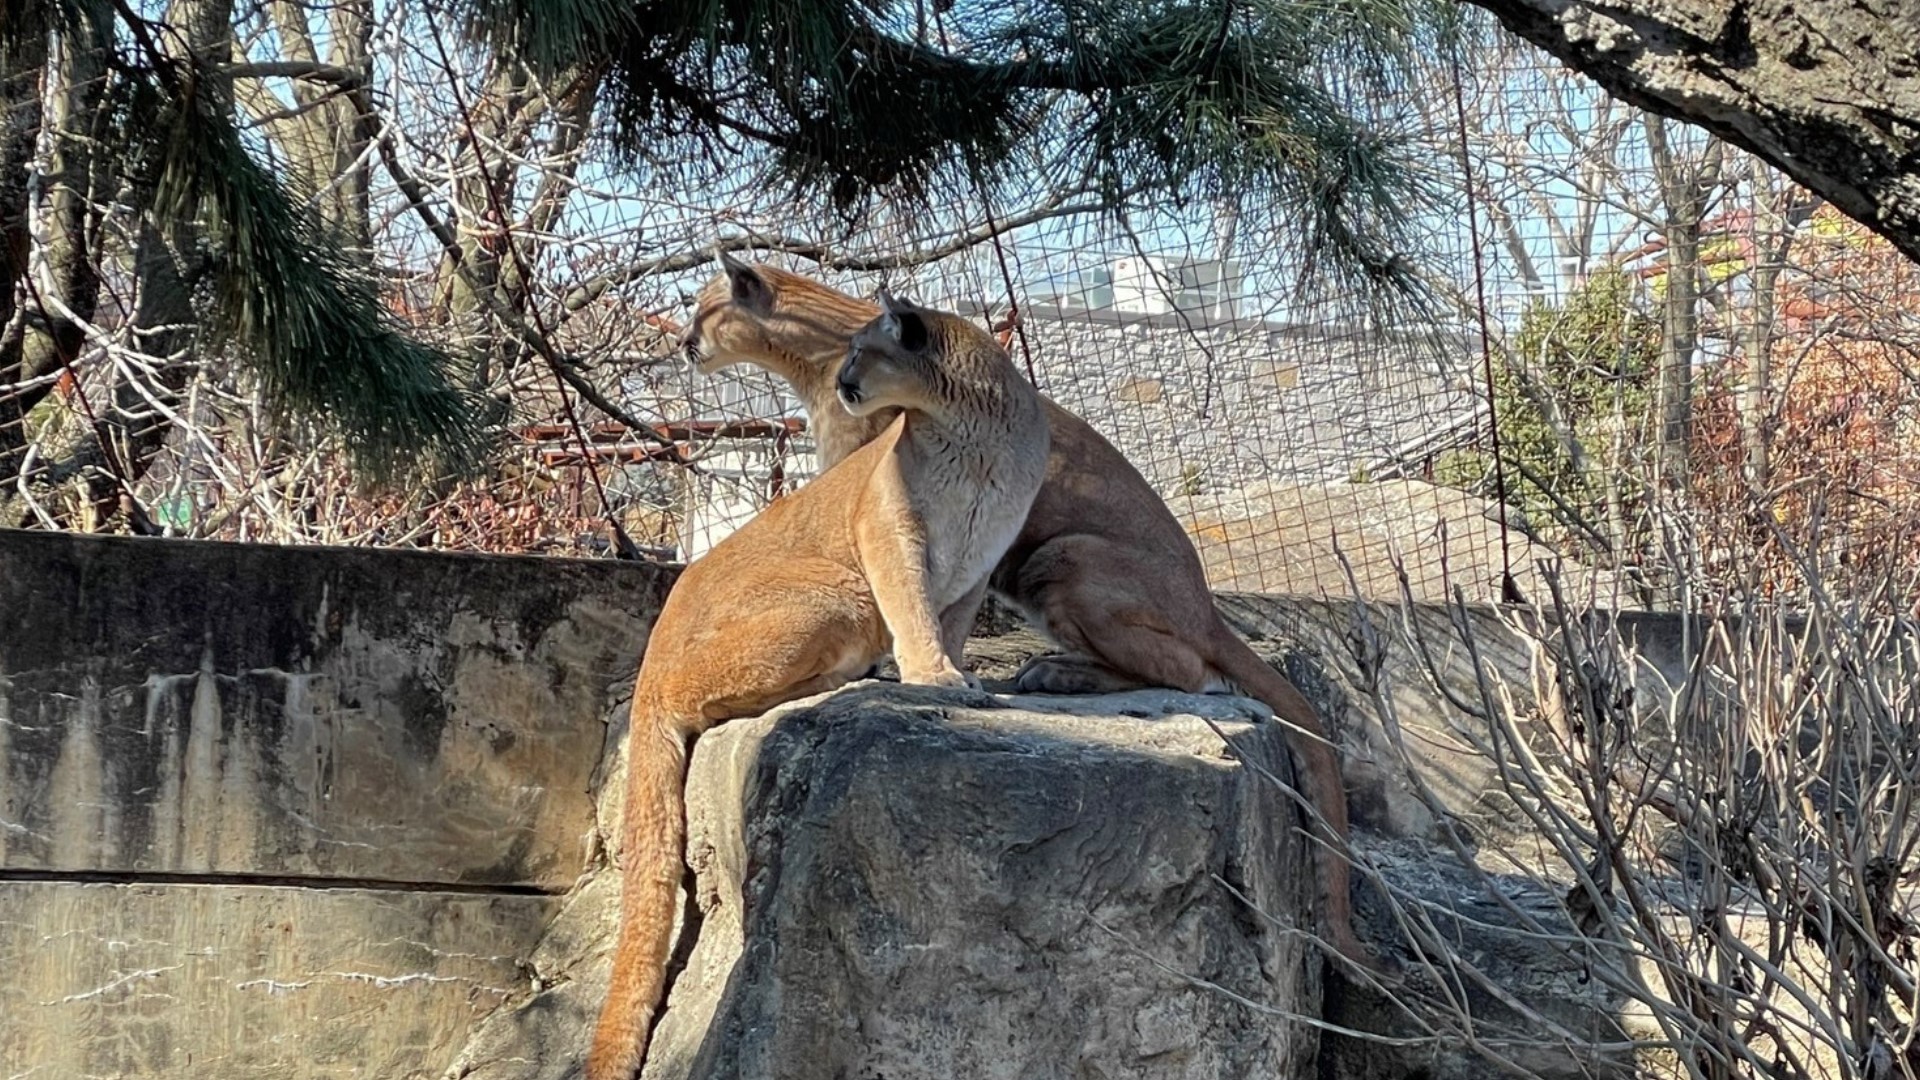 Adopt a puma from the Saint Louis Zoo for Mother's Day |